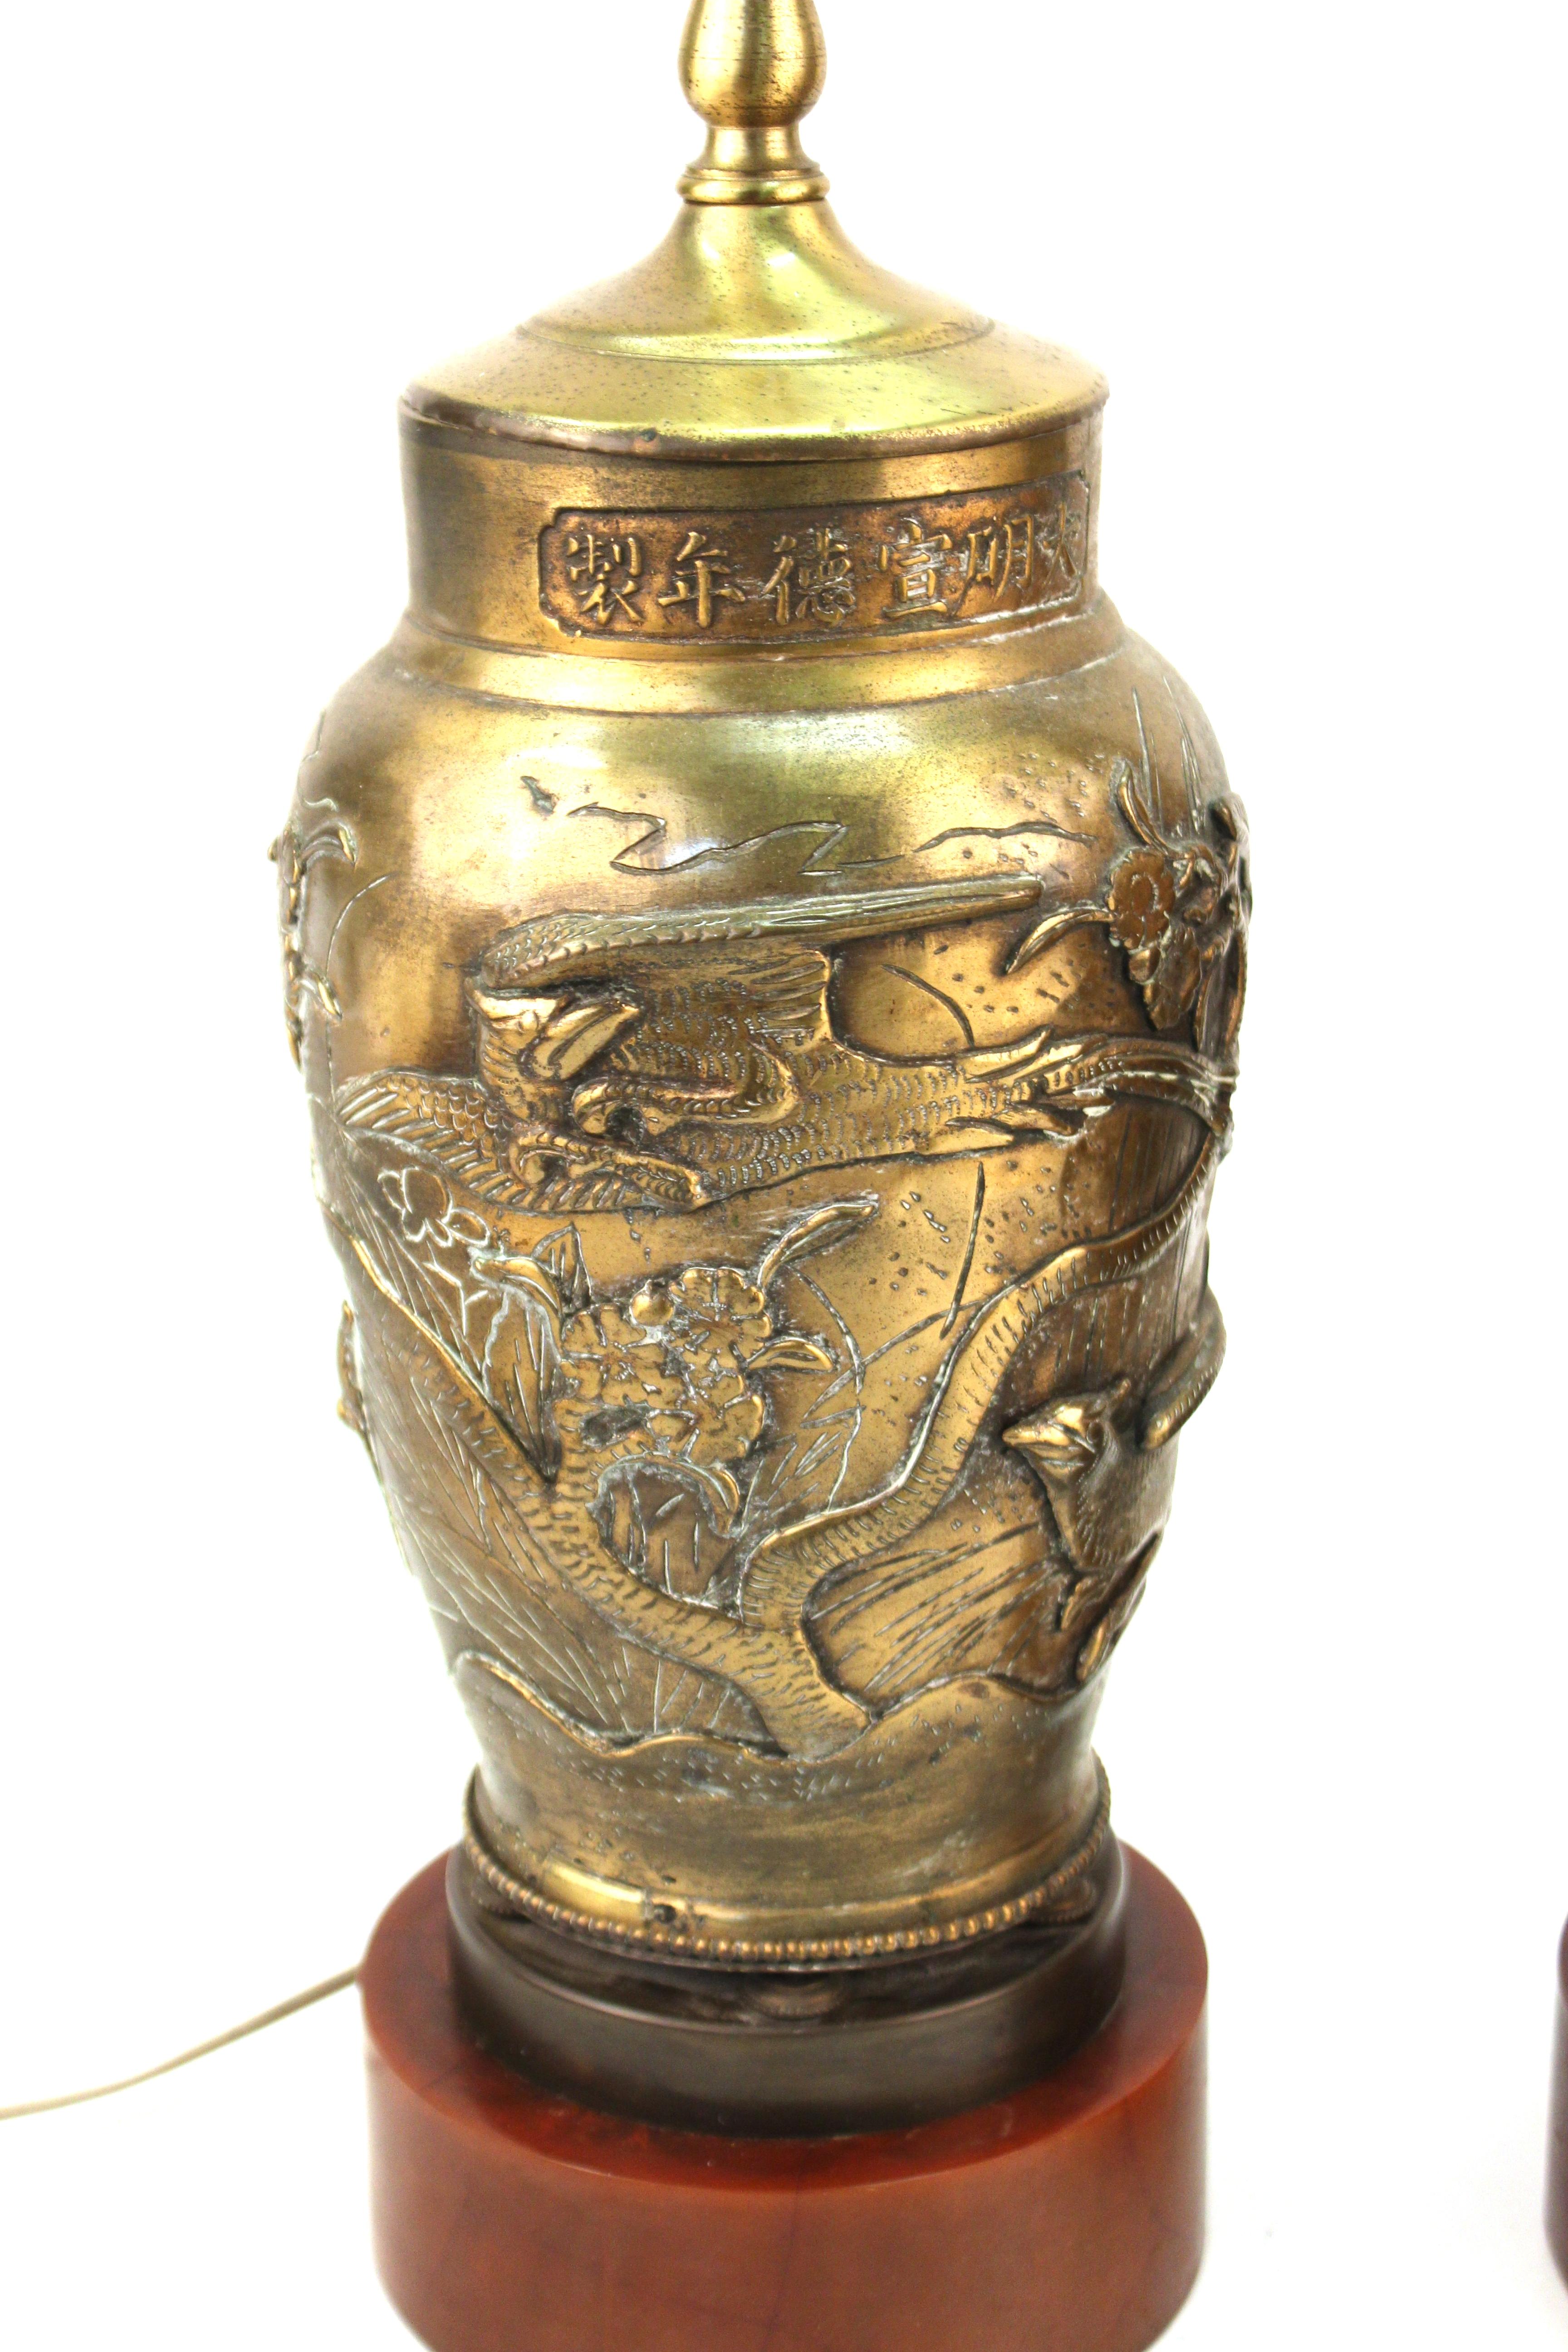 Asian Meiji style pair of brass vases with cylindrical Bakelite bases, turned into table lamps. The pair has bas-relief bird’s motif scenes. In great vintage condition with age-appropriate wear and use.

These vases are made in Japan,  in the 1920s.